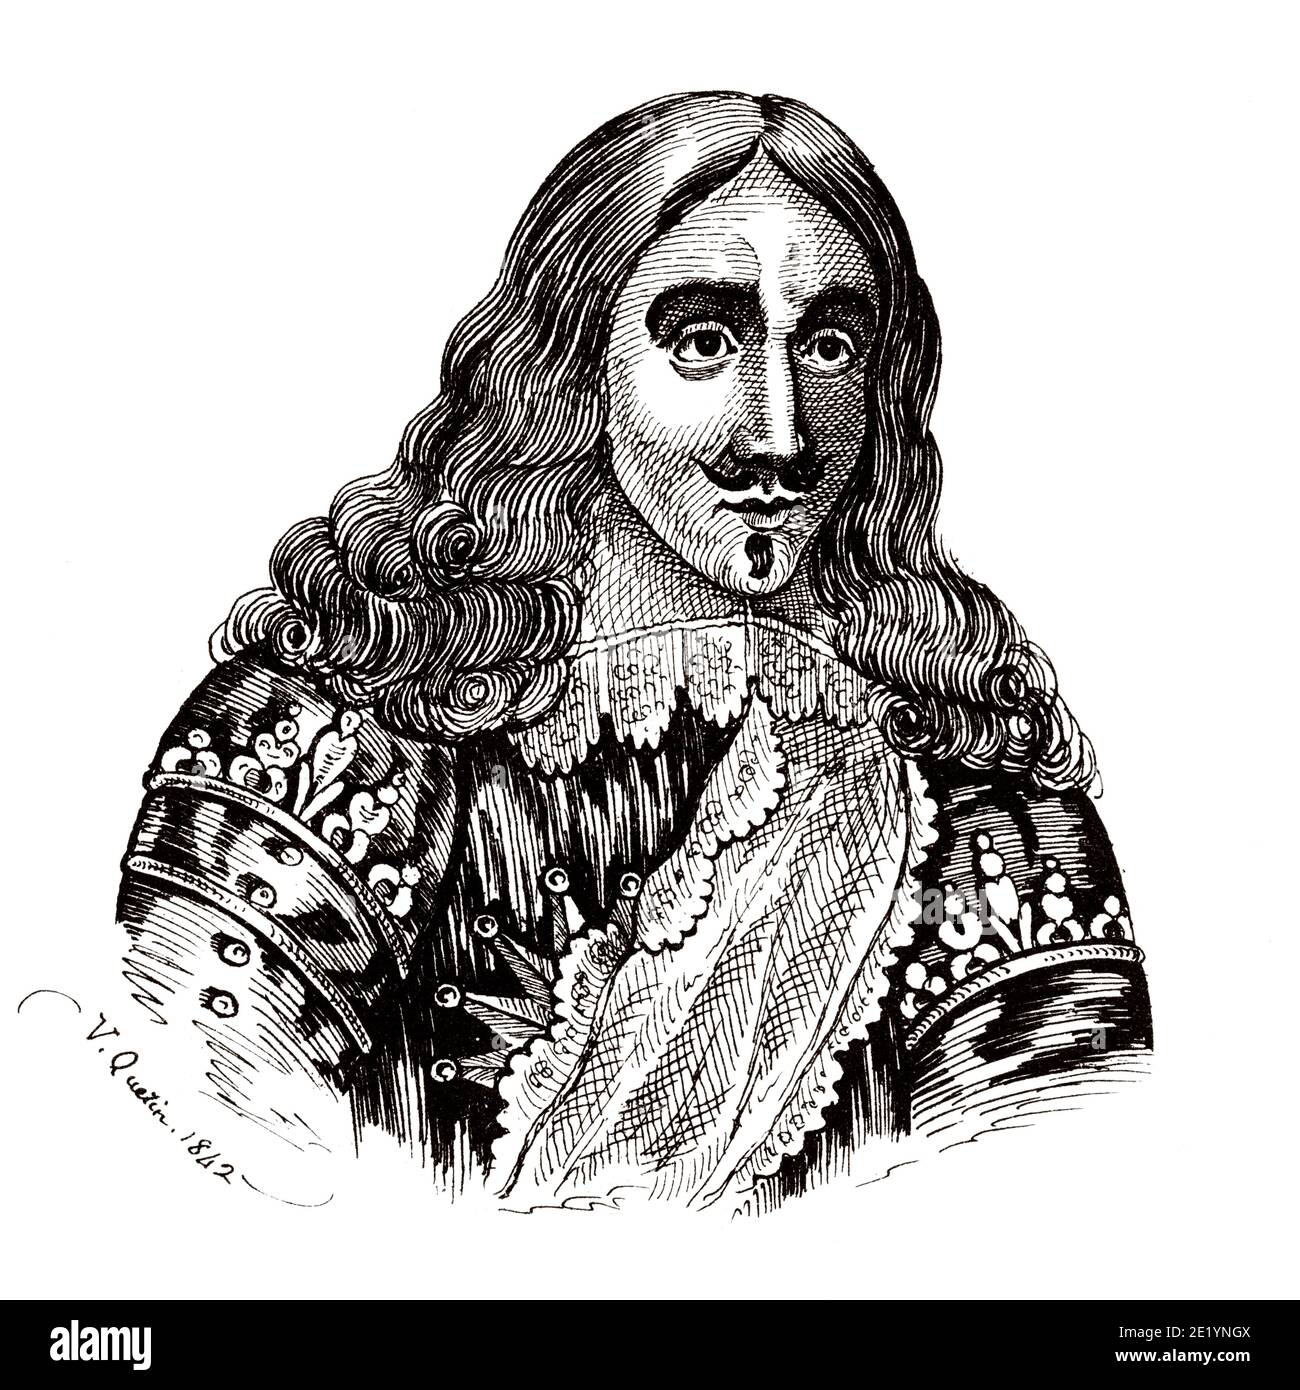 Portrait of Louis XIII the Just (1601 - 1643). King of France from 1610 to 1643. House of Bourbon. History of France, from the book Atlas de la France 1842 Stock Photo